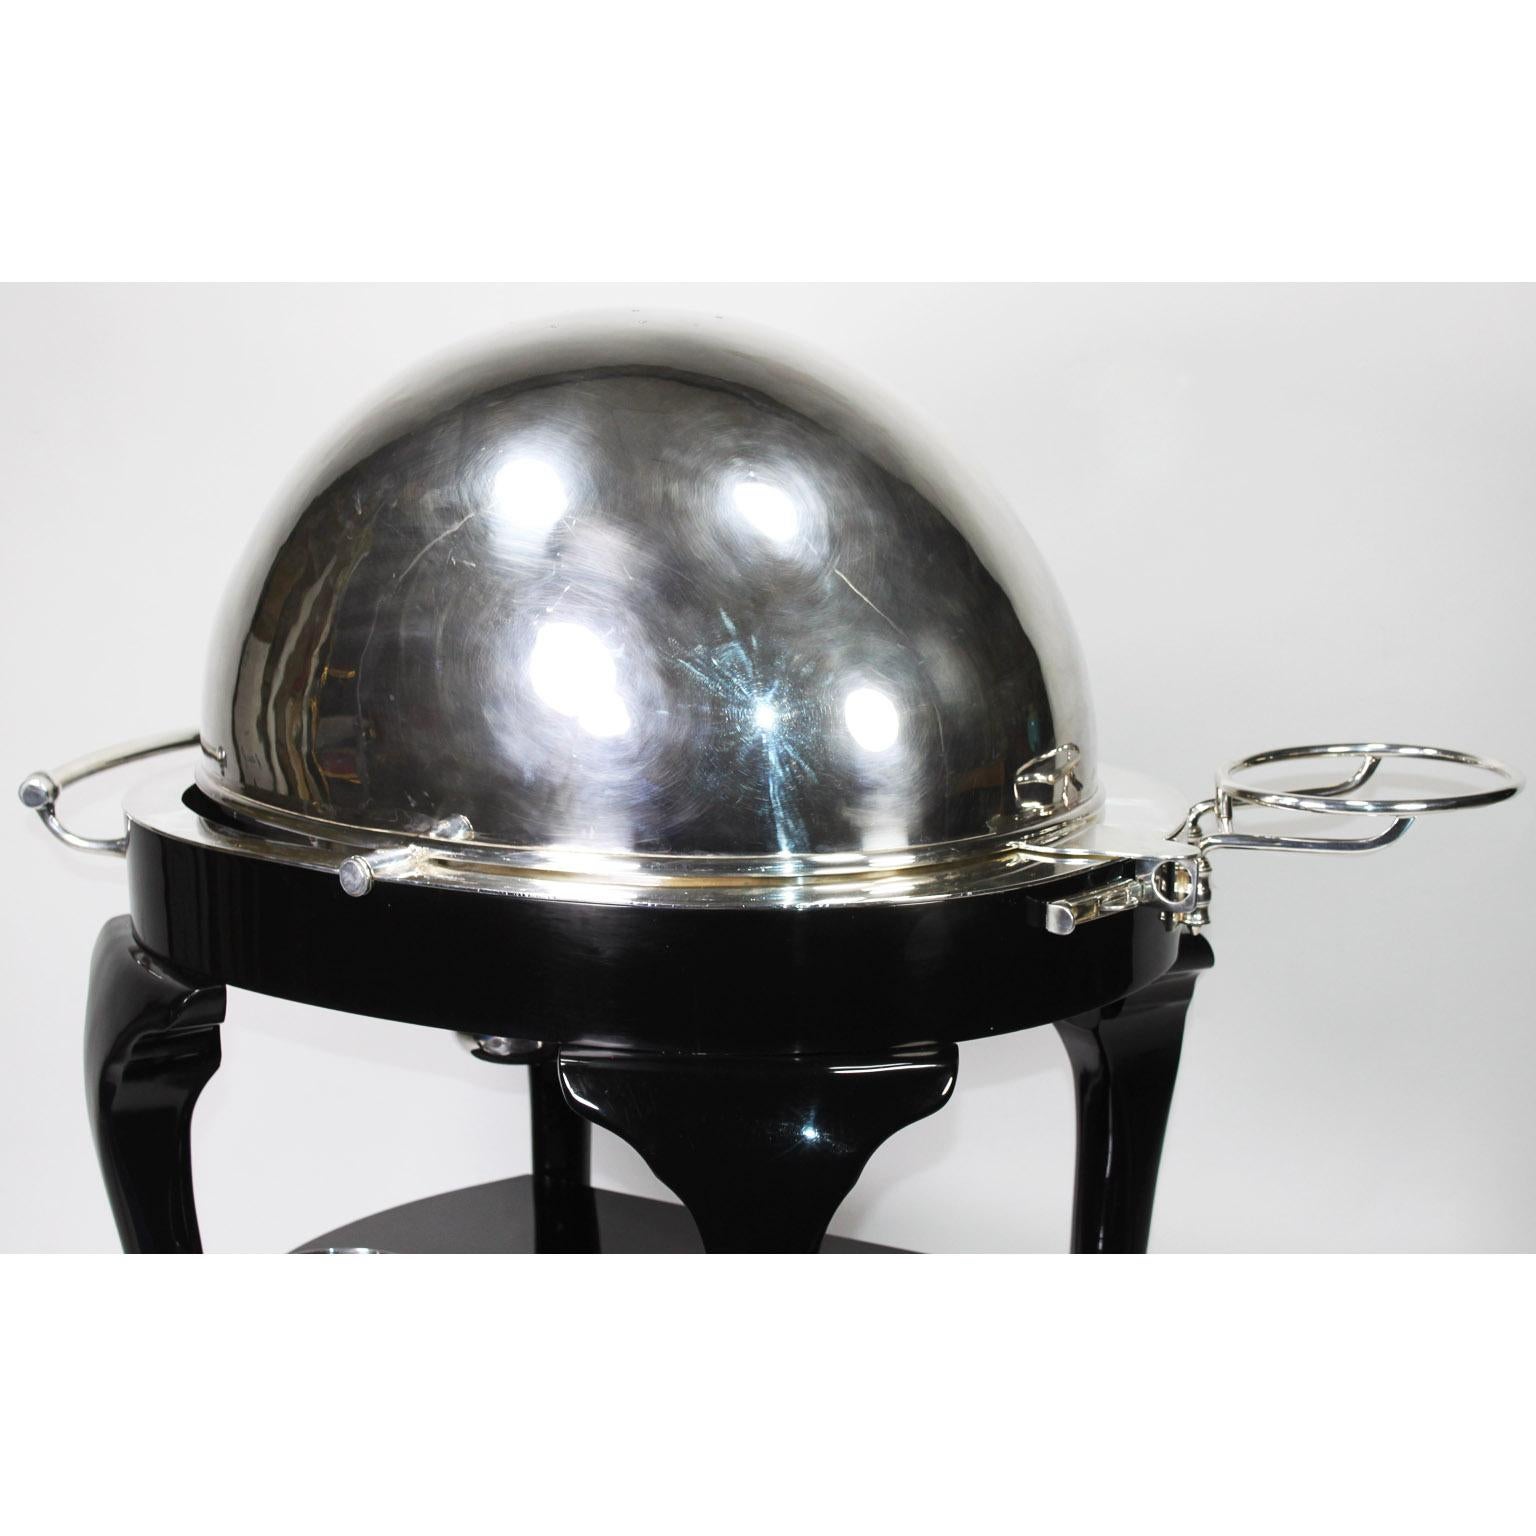 English 1930s Art Deco Ebonized & Silver Plated Beef/Turkey/Lamb Carving Trolley For Sale 1